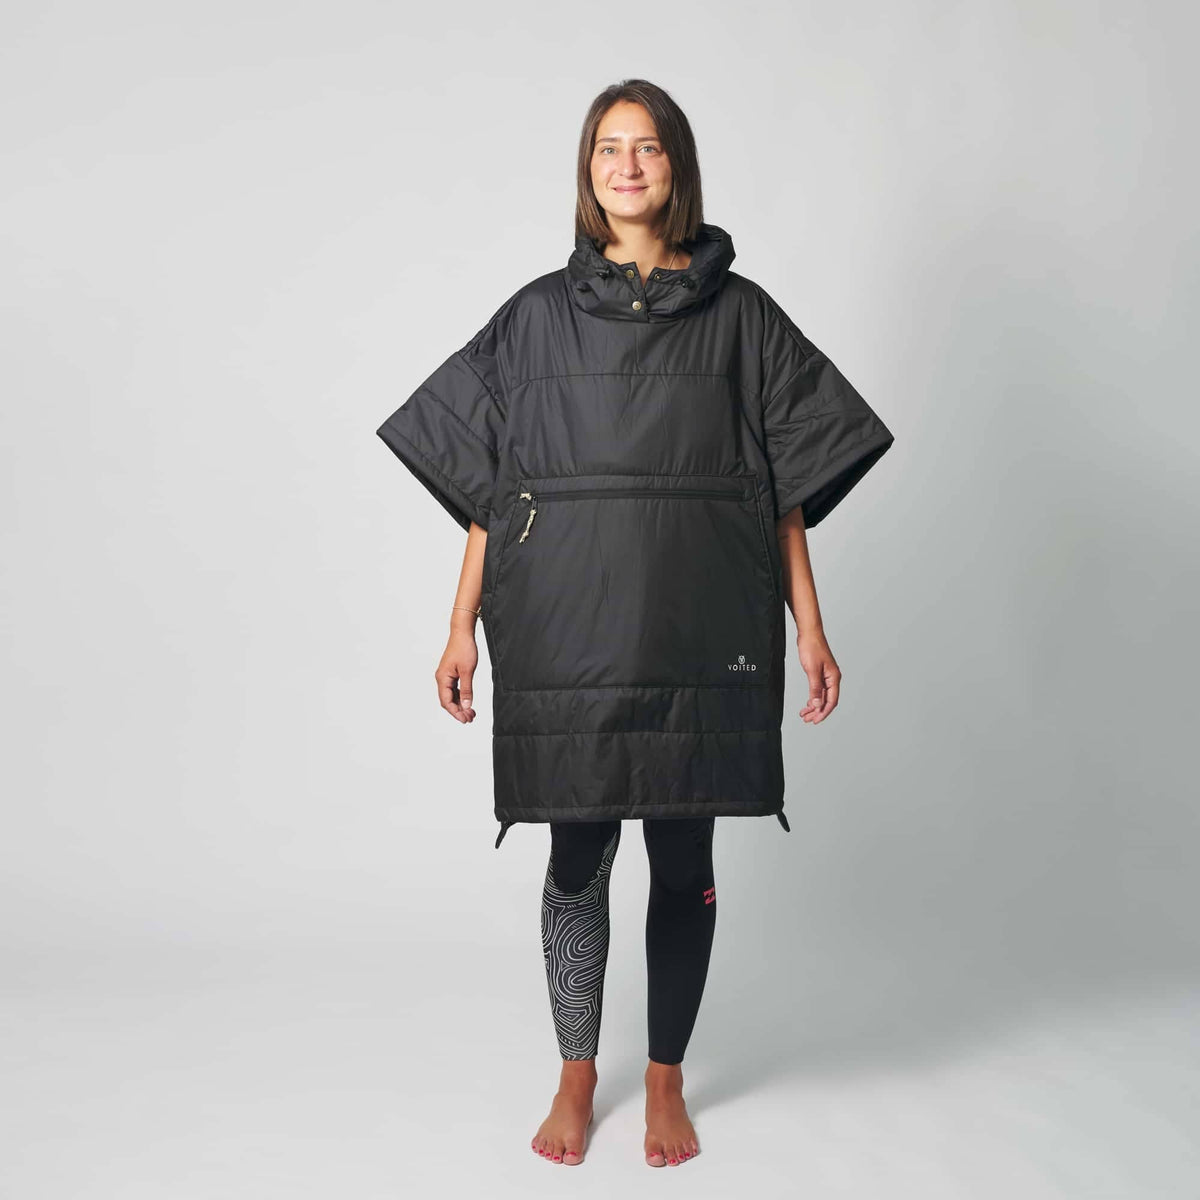 VOITED Outdoor Poncho for Surfing, Camping, Vanlife & Wild Swimming - Black